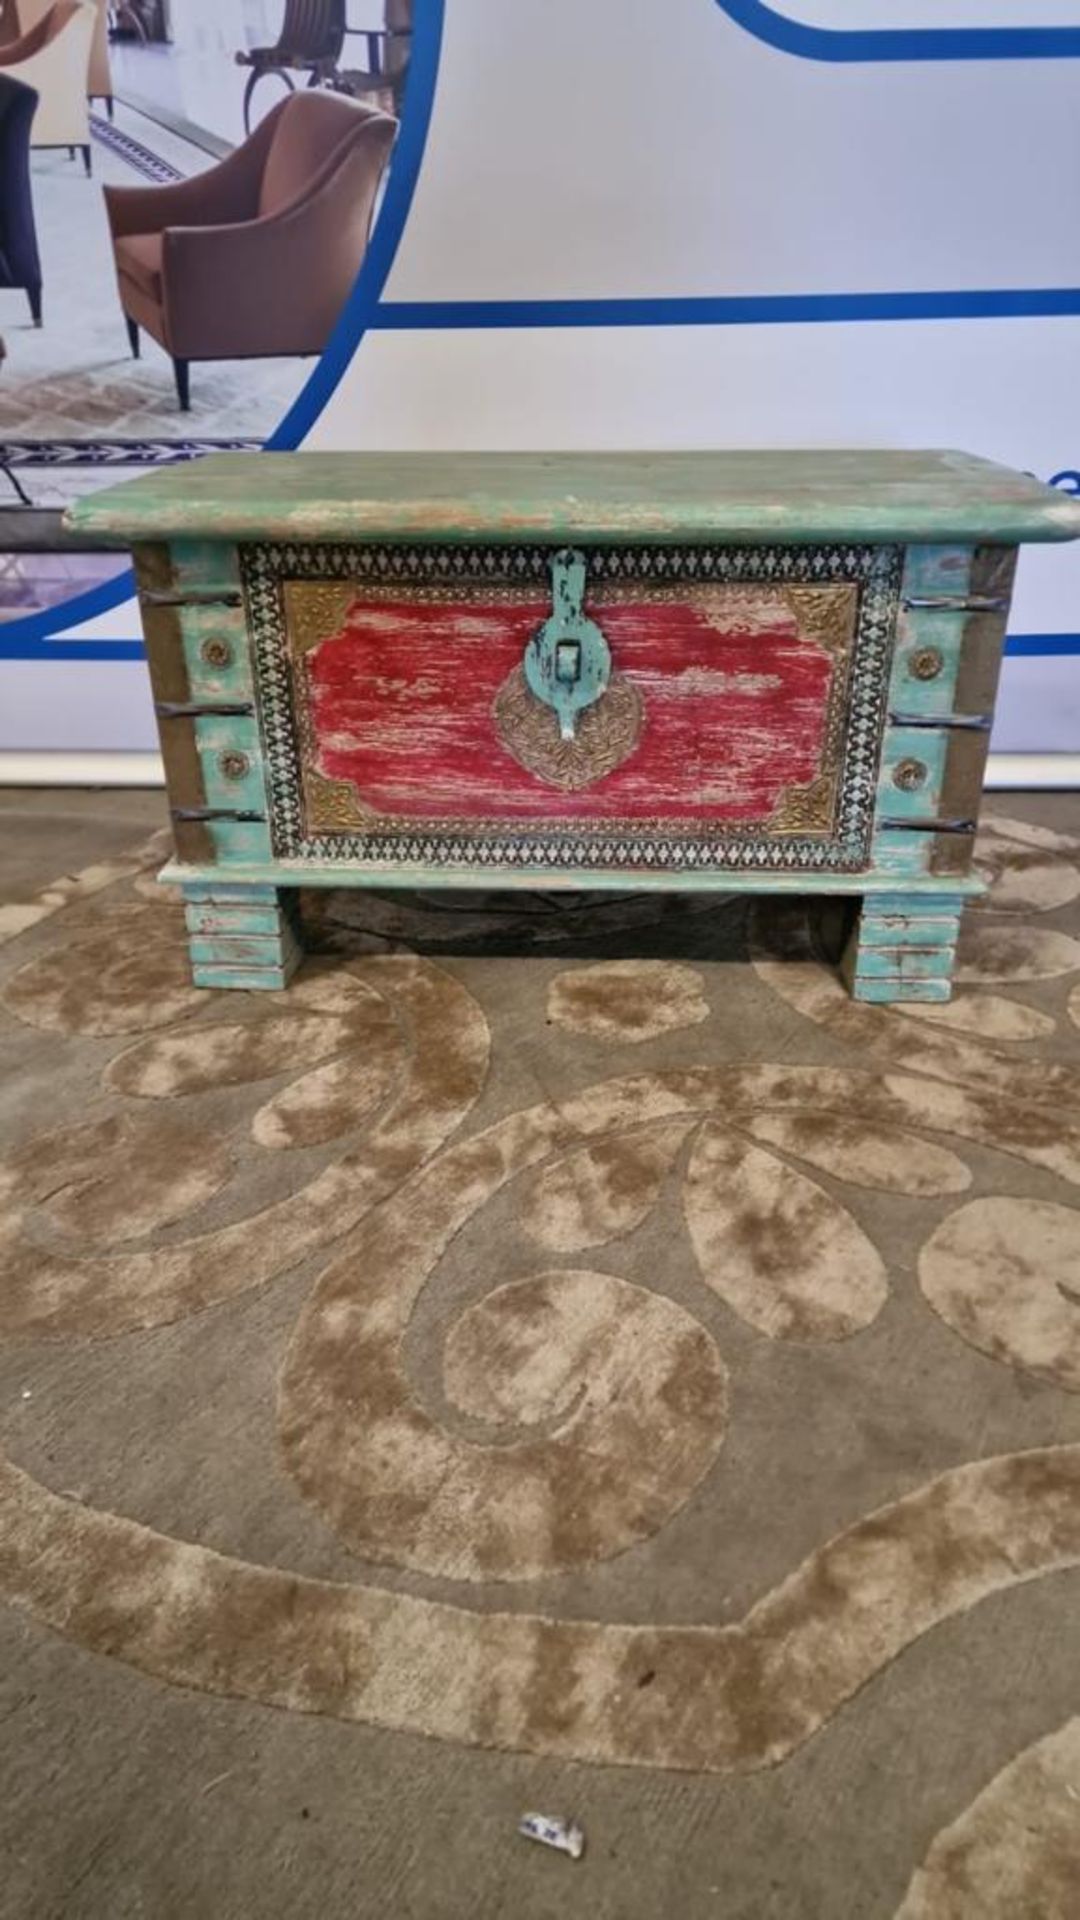 Craftsmen Indian Hand-Carved And Painted Trunk With Patina Distressed Look 80 x 40 x 45cm (D9) - Image 3 of 3